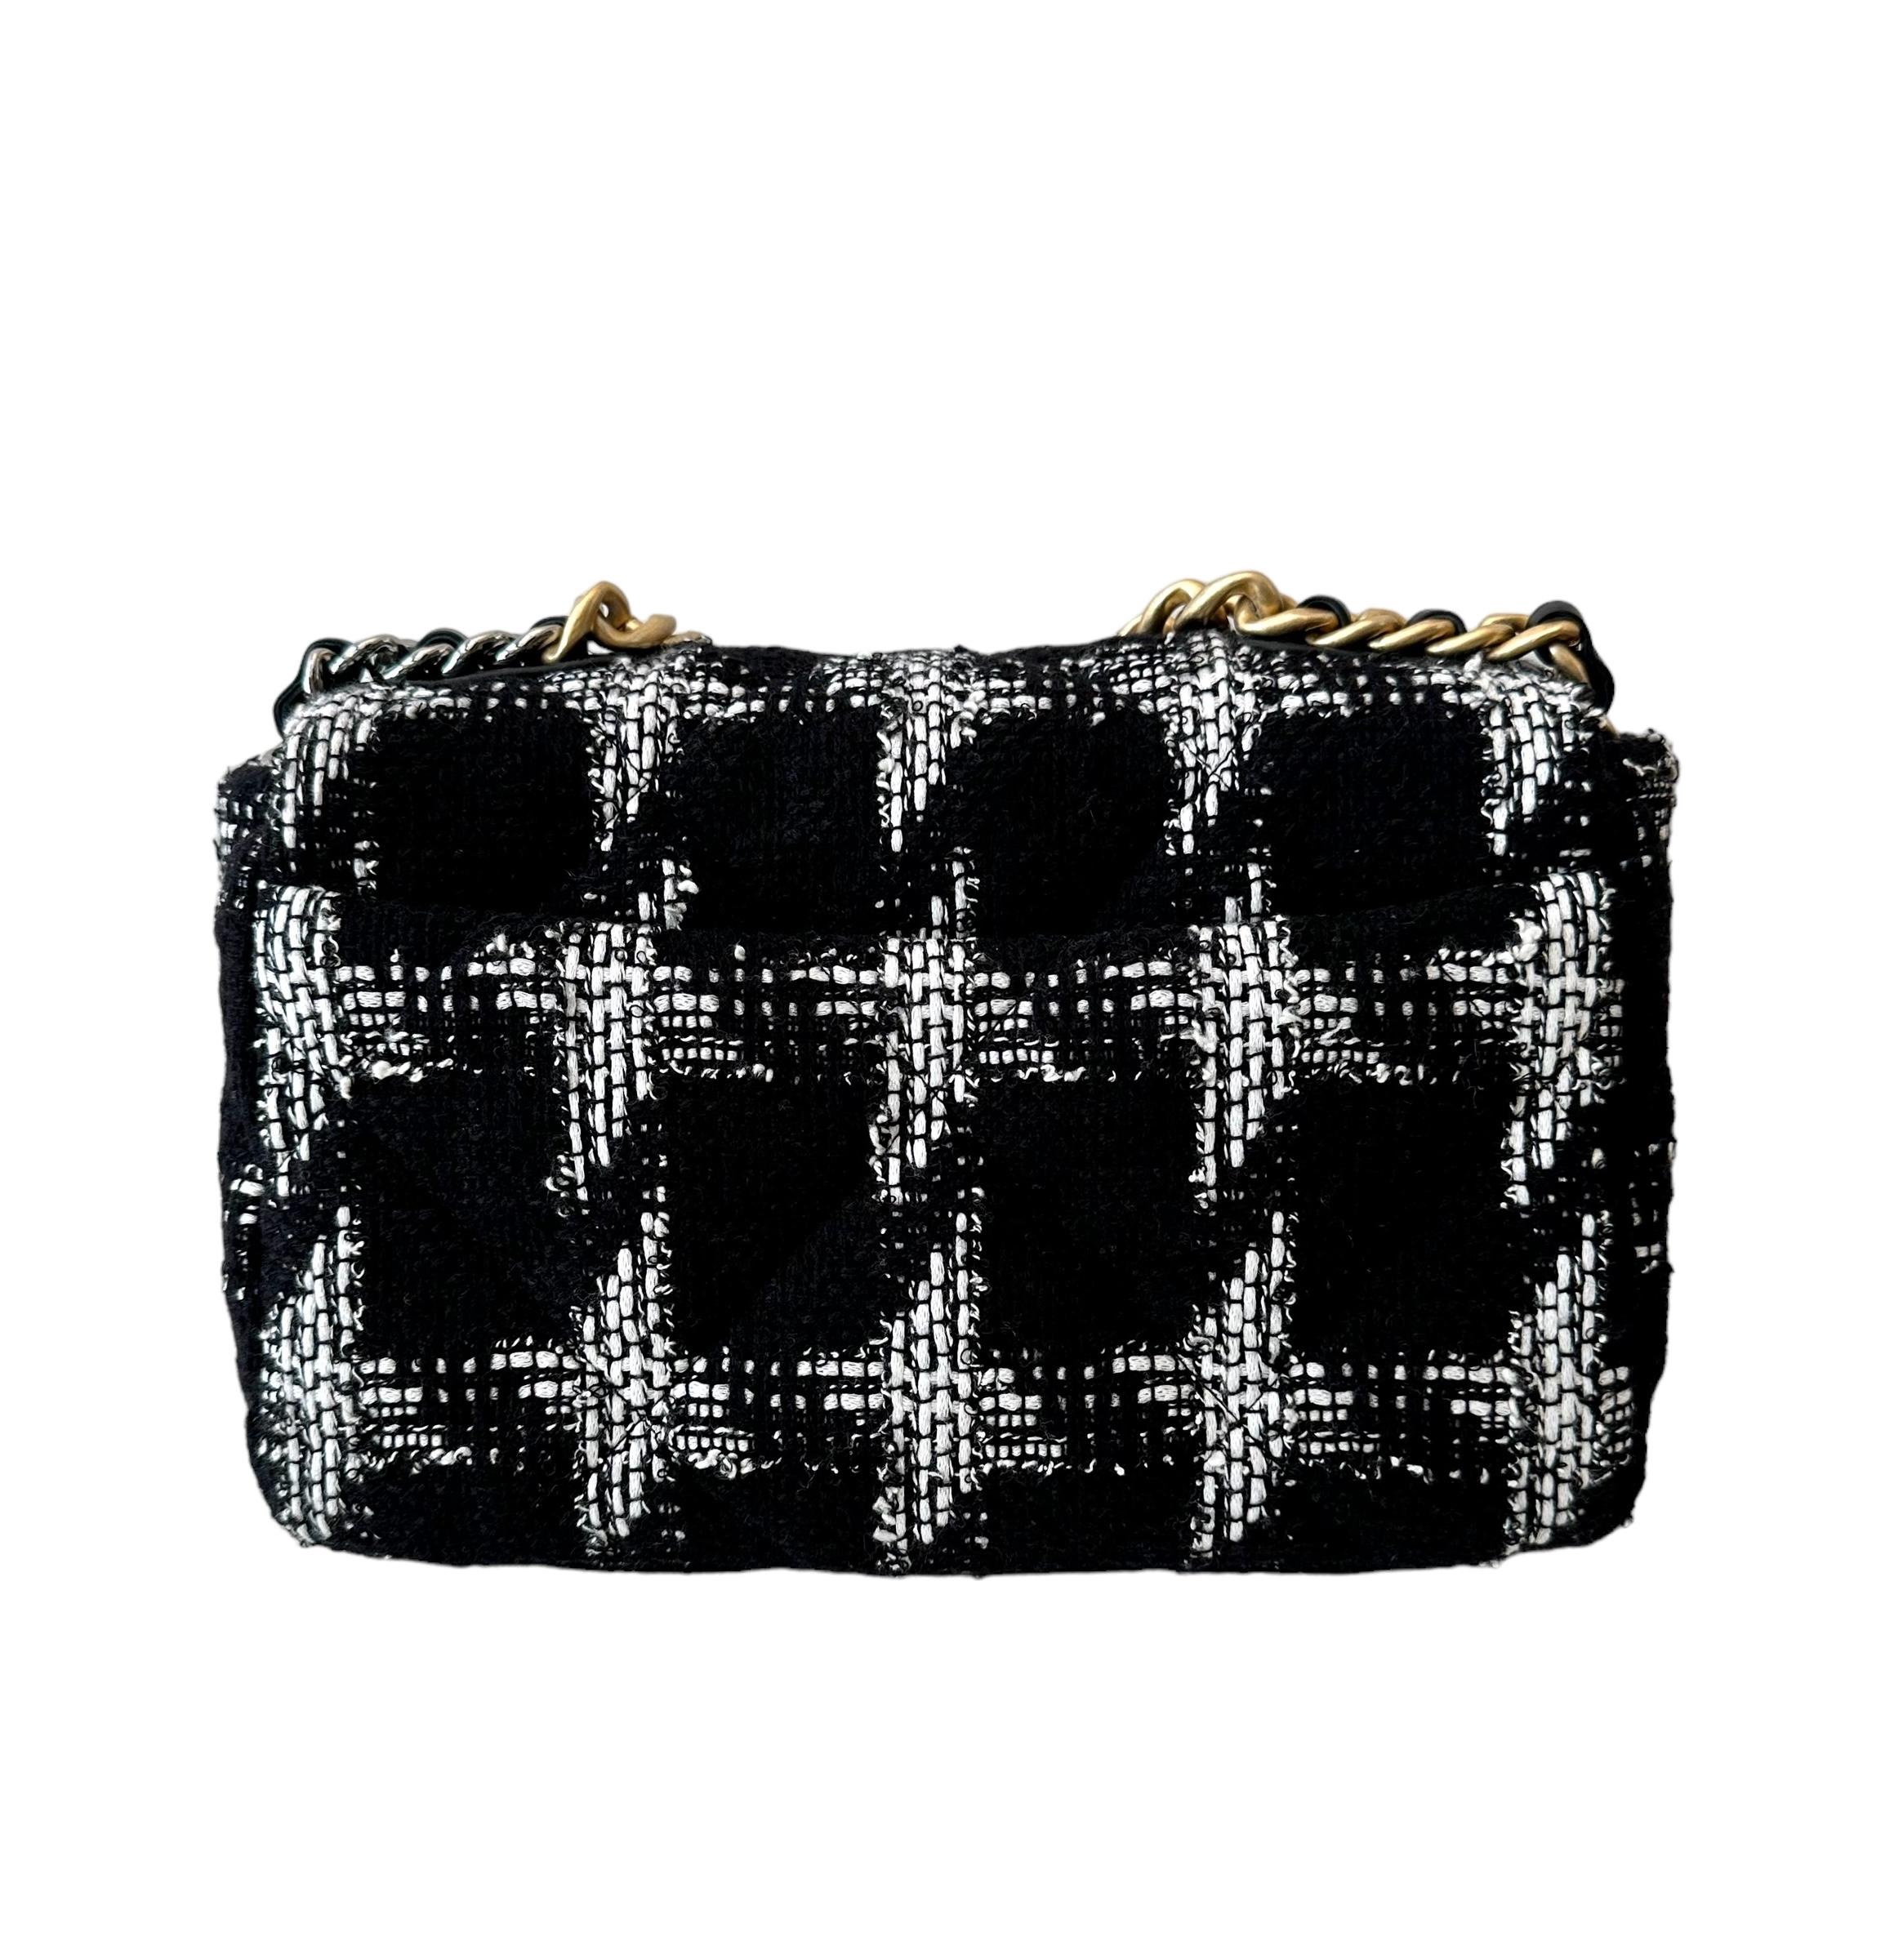 Chanel Black and White Tweed Chanel 19 Flap Bag For Sale 10